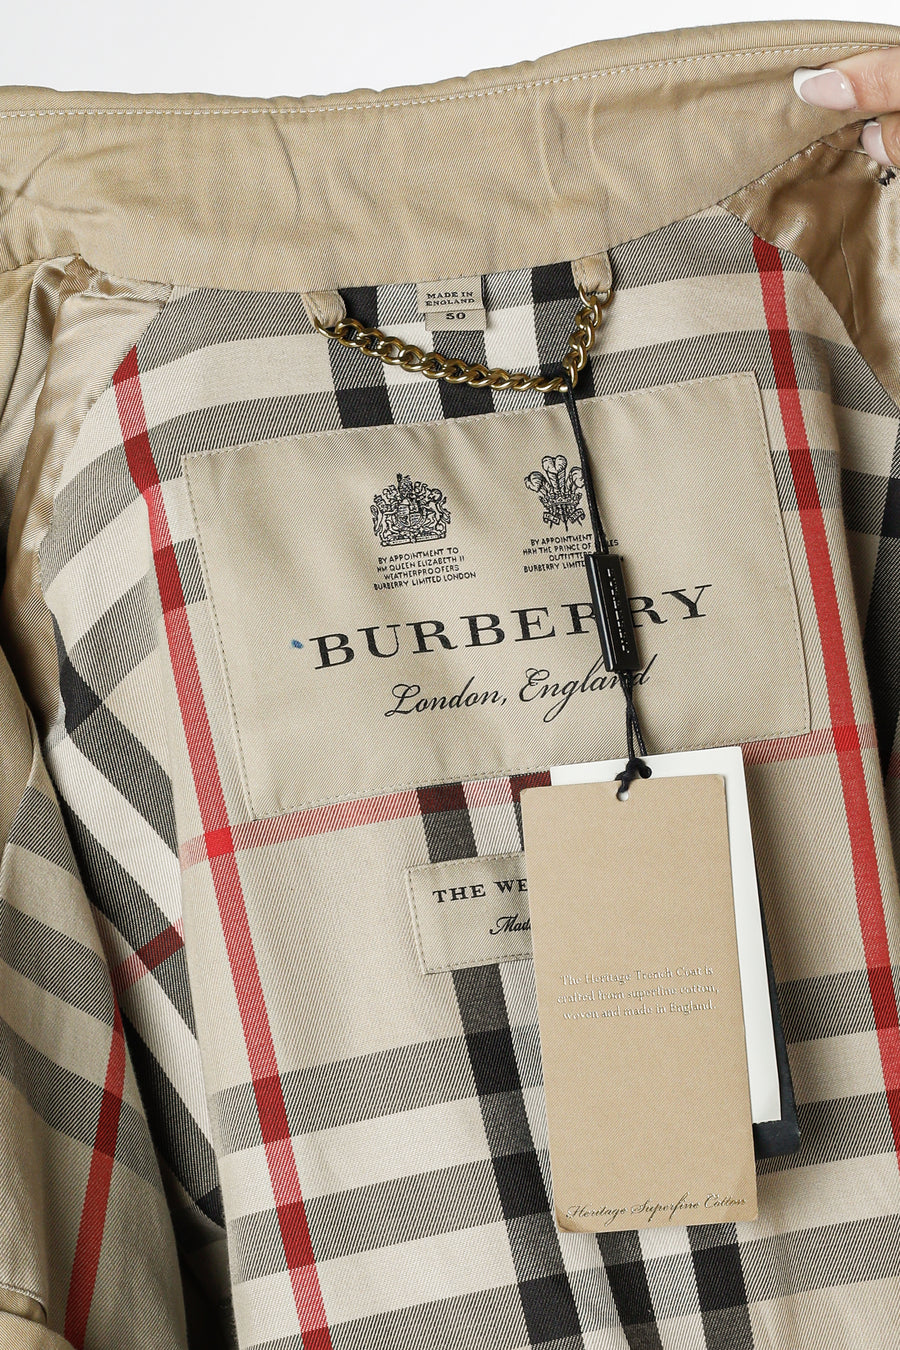 Vintage Burberry Trench Coat - L